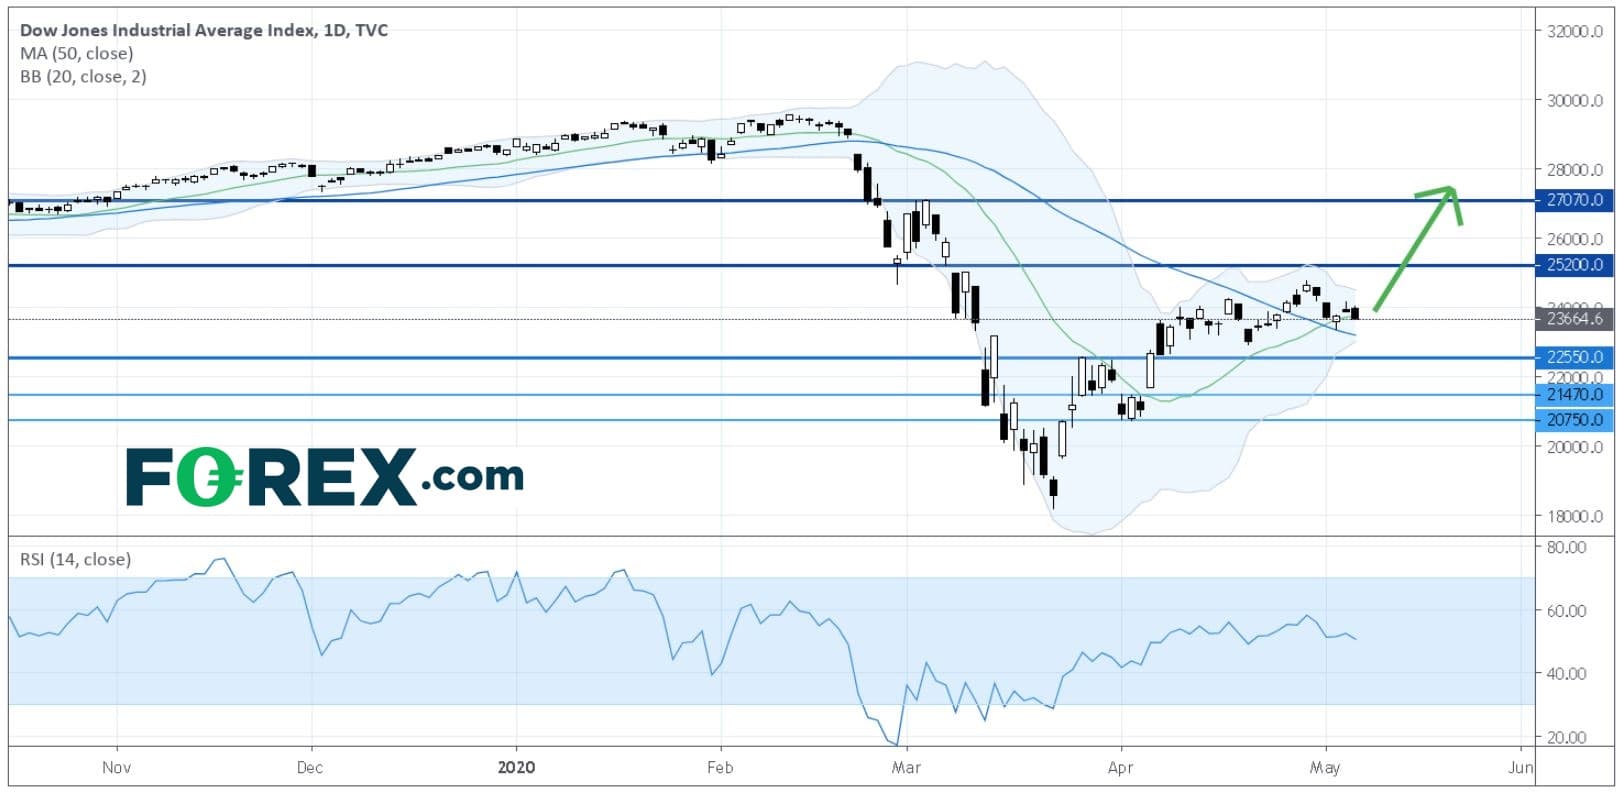 Chart analysis of Dow Jones Industrial average index. Published in May 2020 by FOREX.com